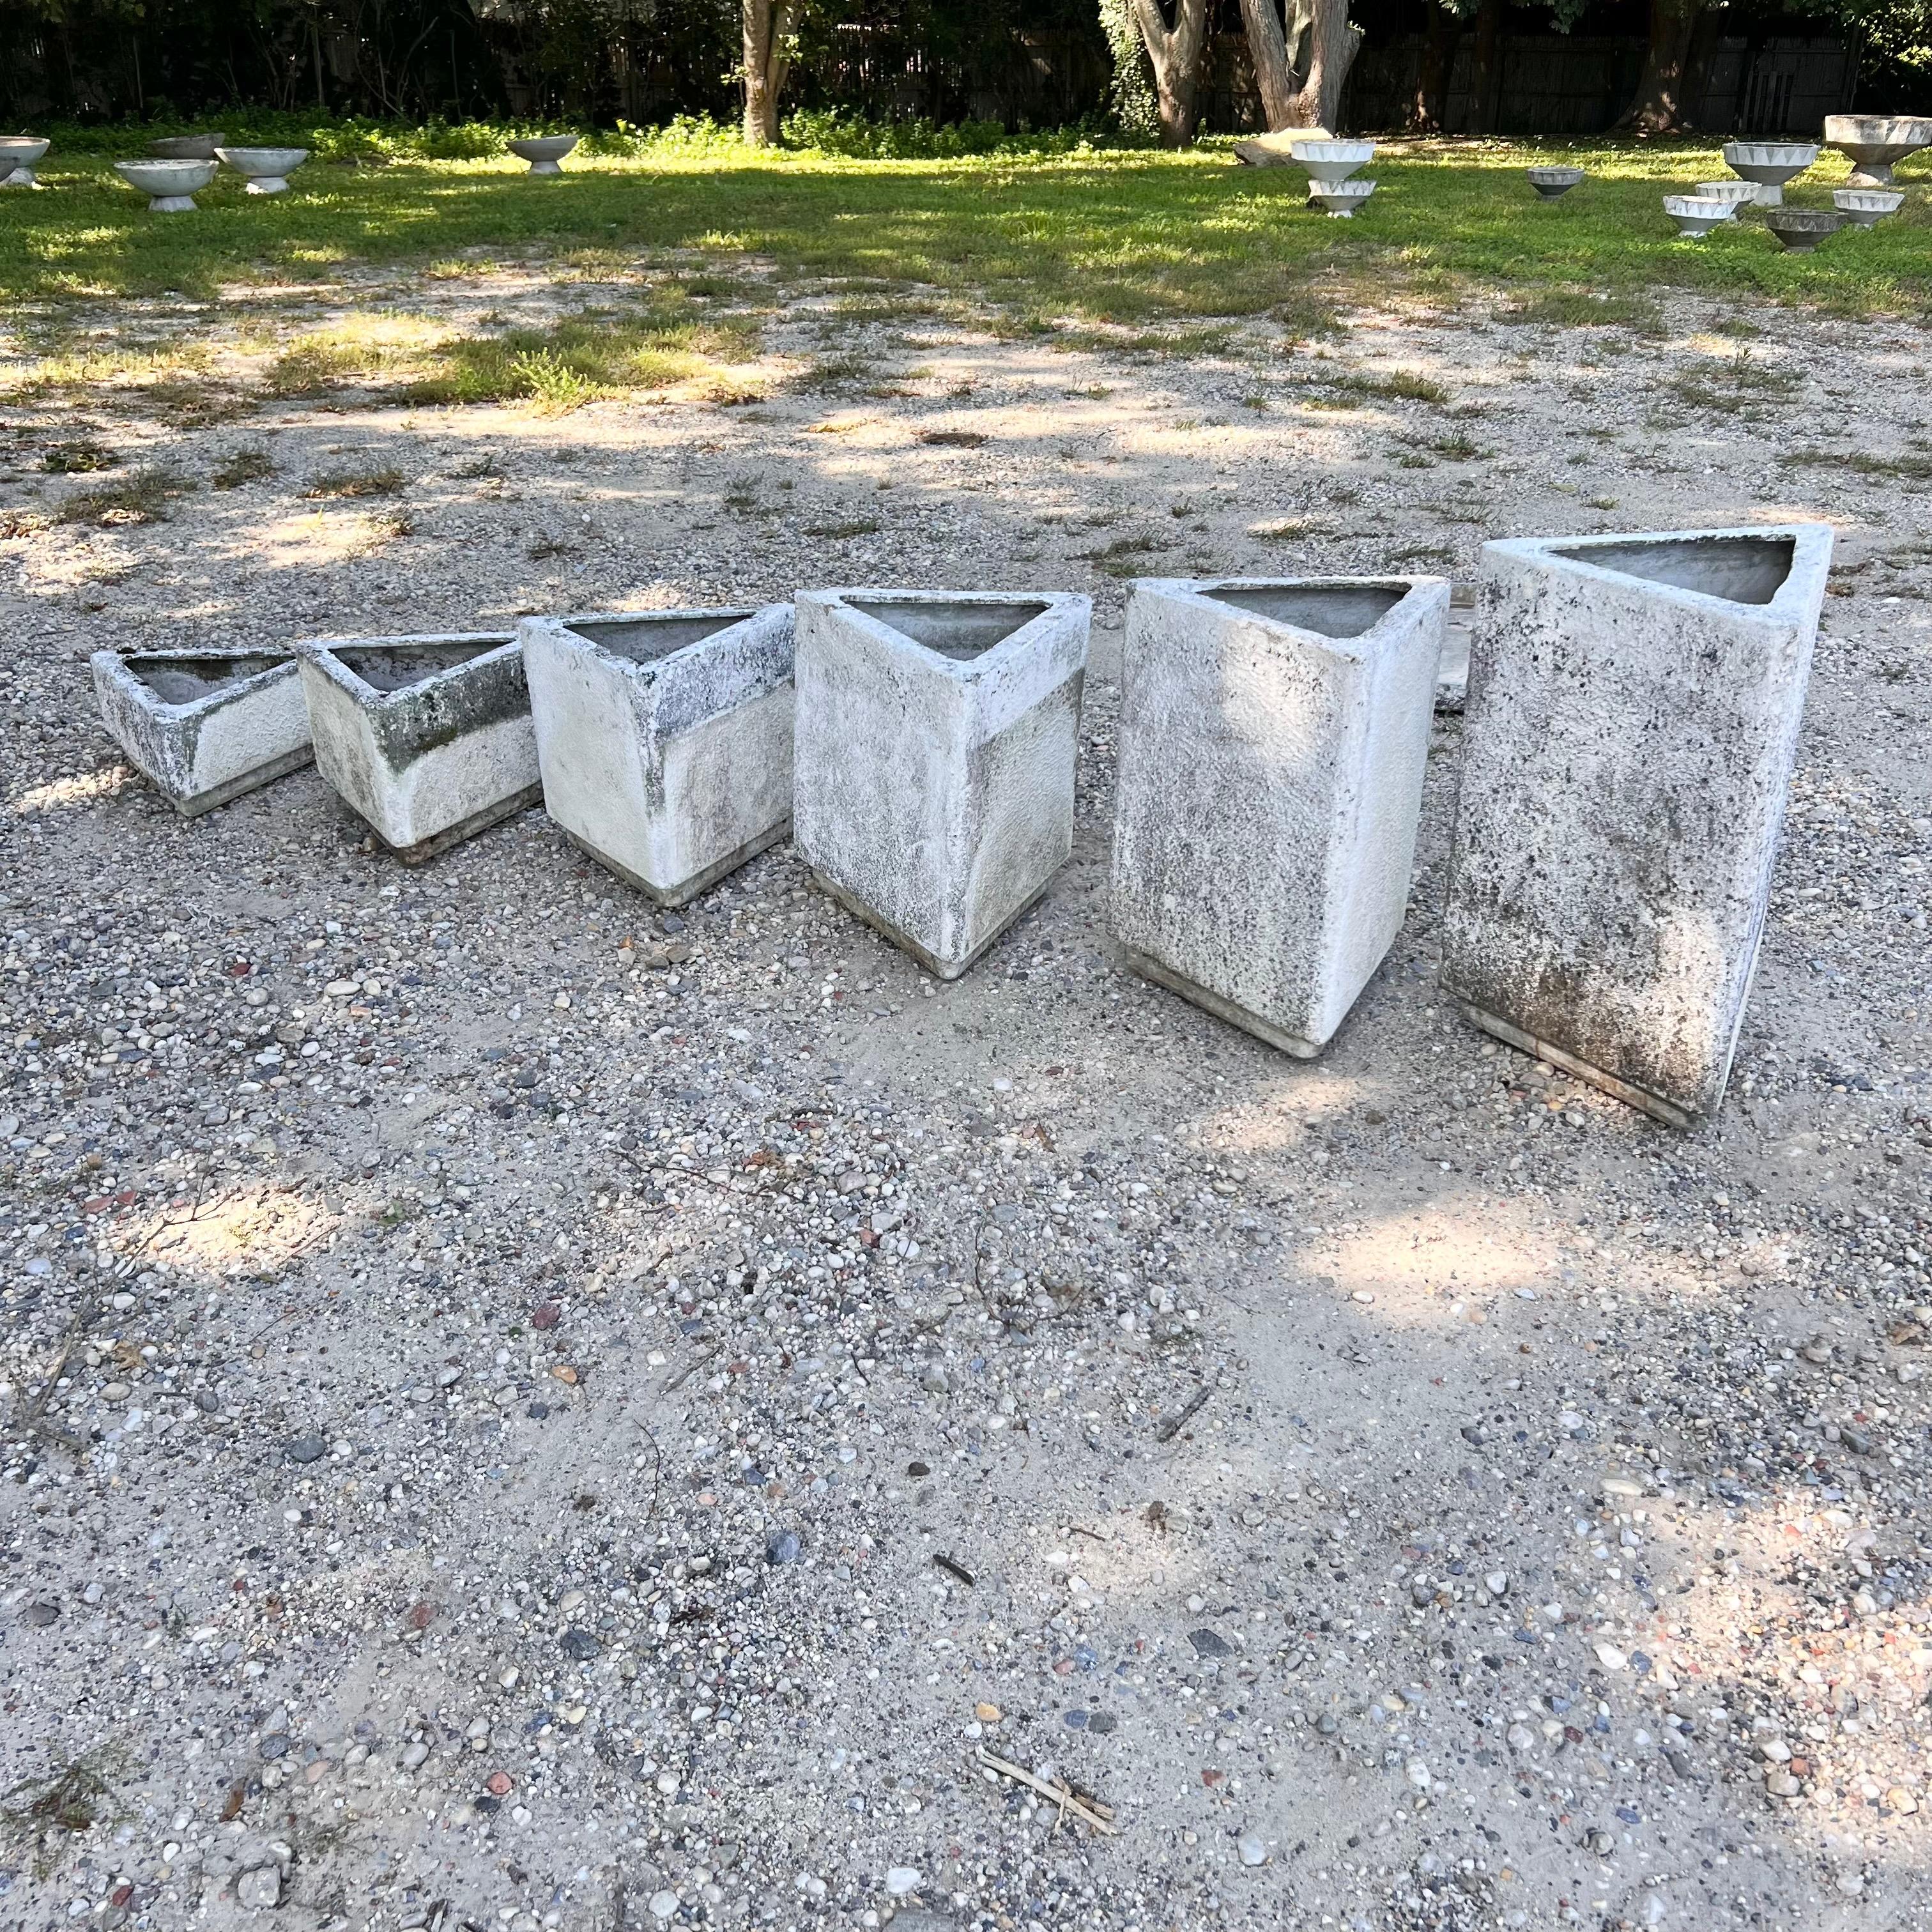 Industrial Complete Set of Triangular Planters by Willy Guhl, 1974 Switzerland For Sale